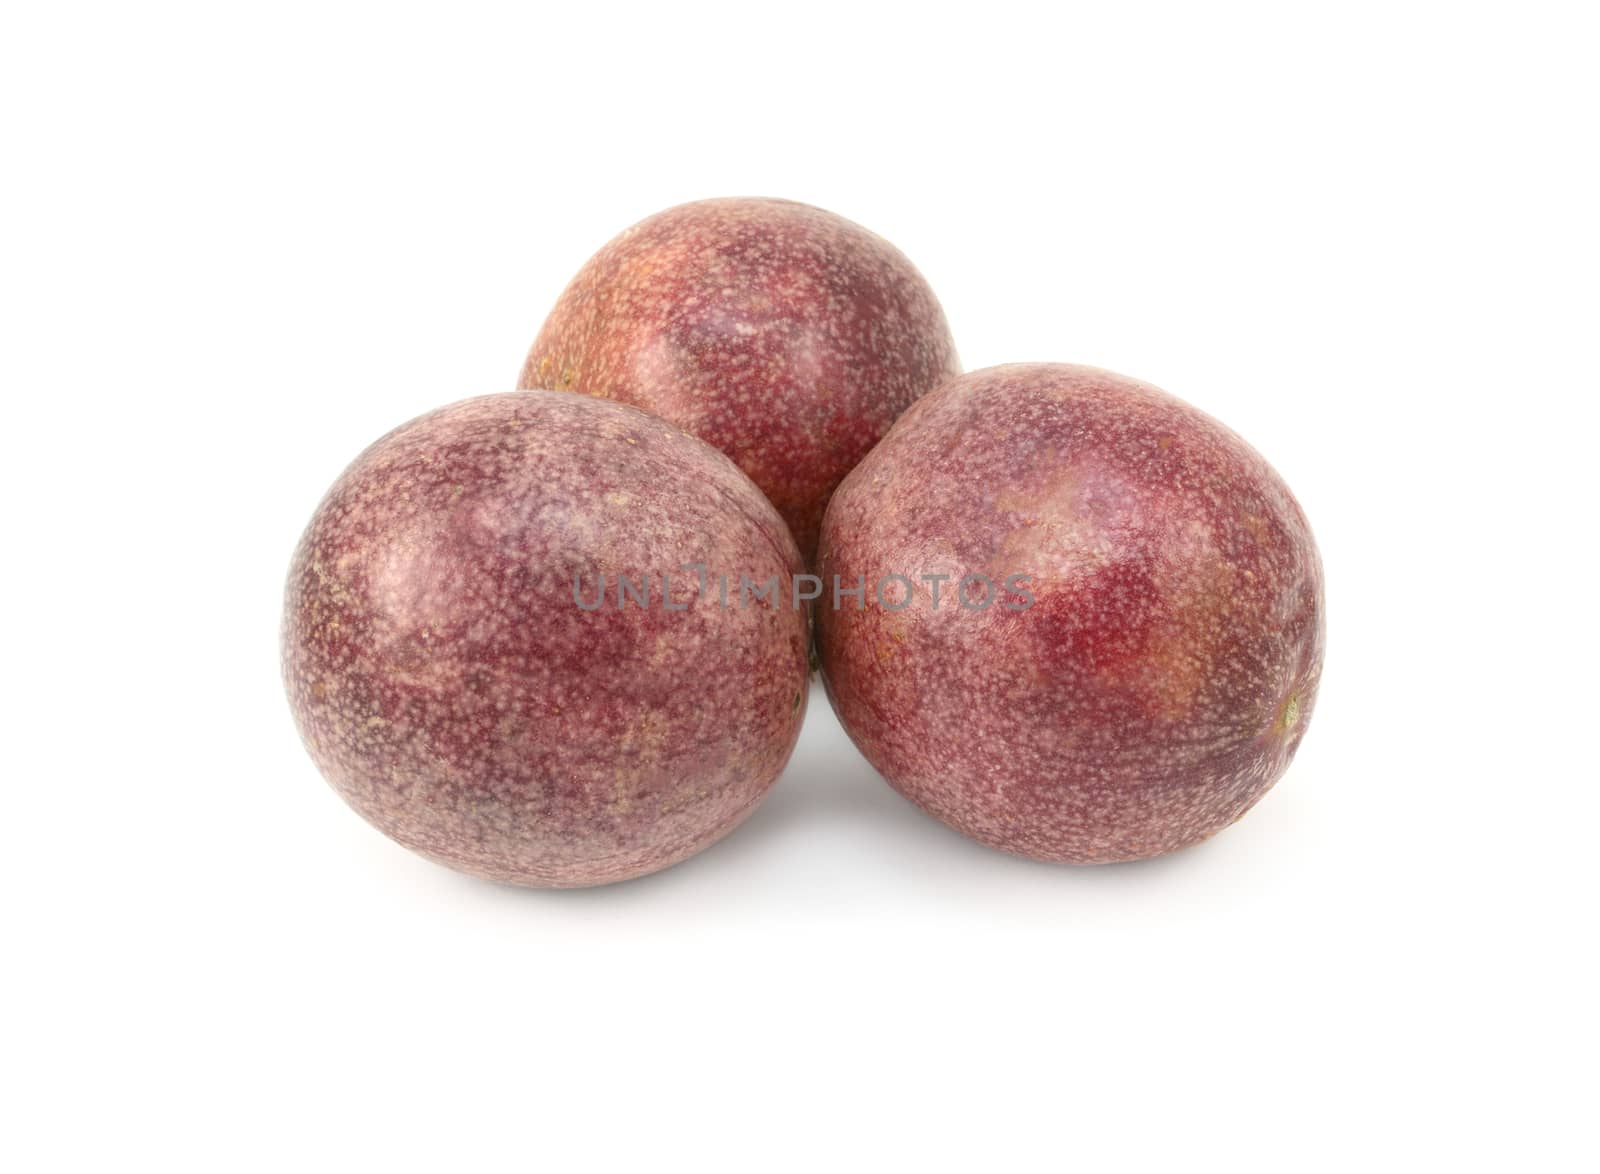 Three whole passion fruits with speckled purple skins, on a white background